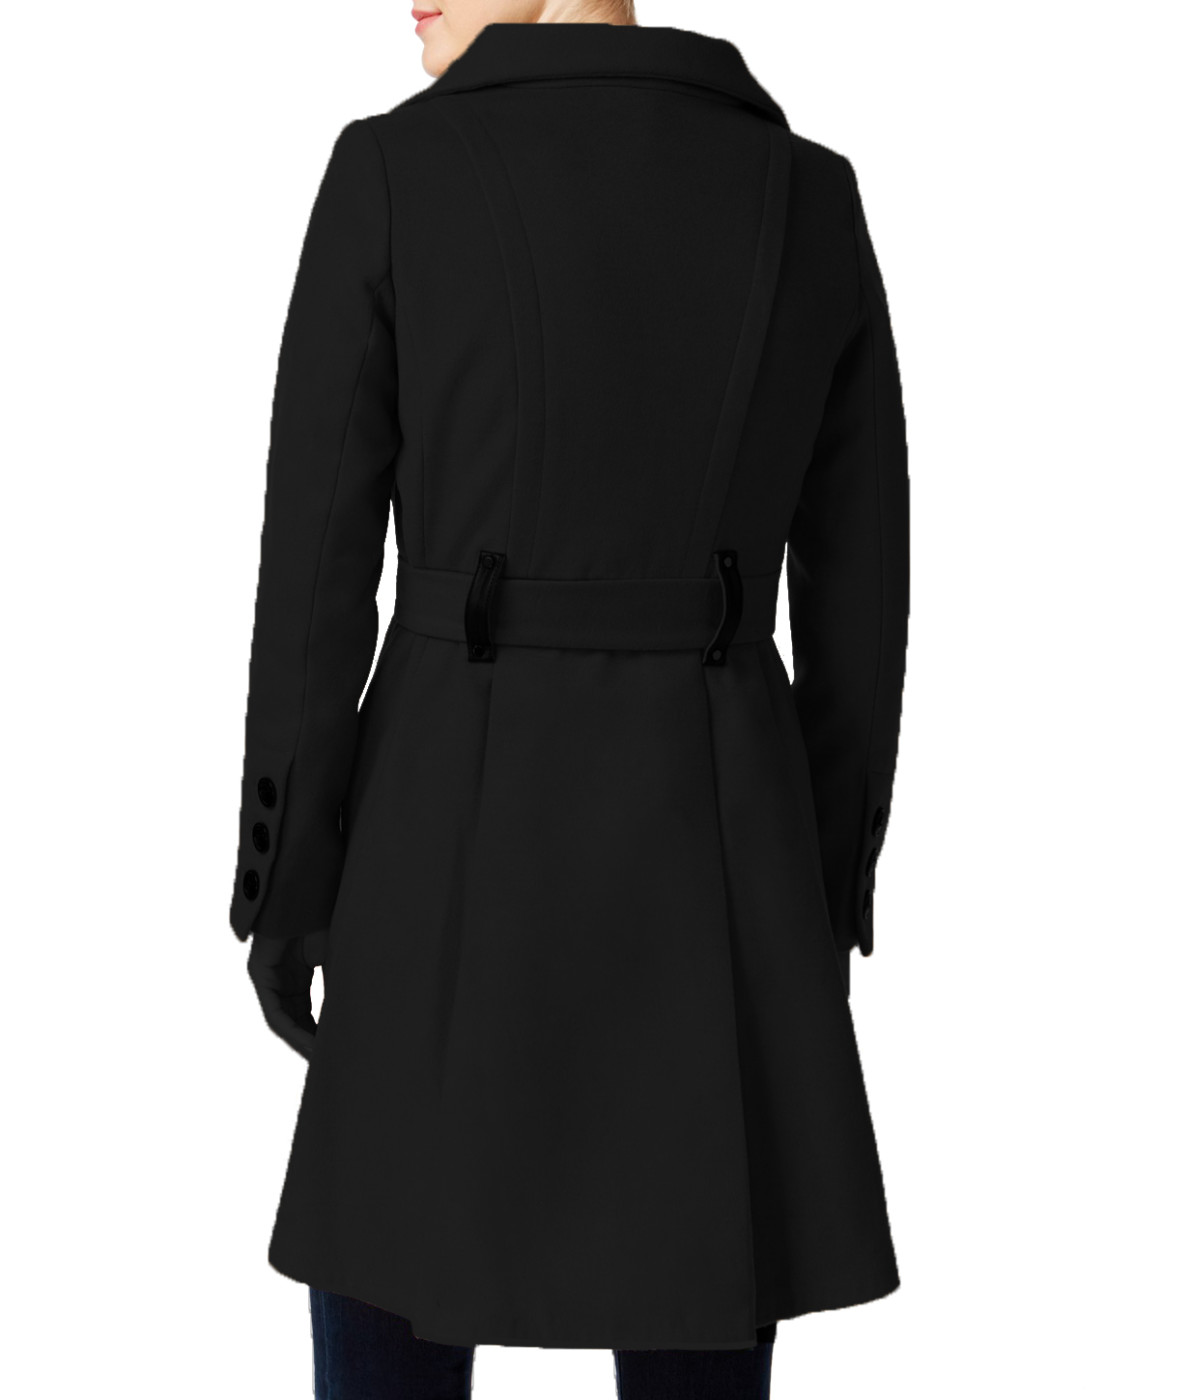 woocommerce-673321-2209615.cloudwaysapps.com-madden-girl-womens-faux-leather-trim-skirted-coat